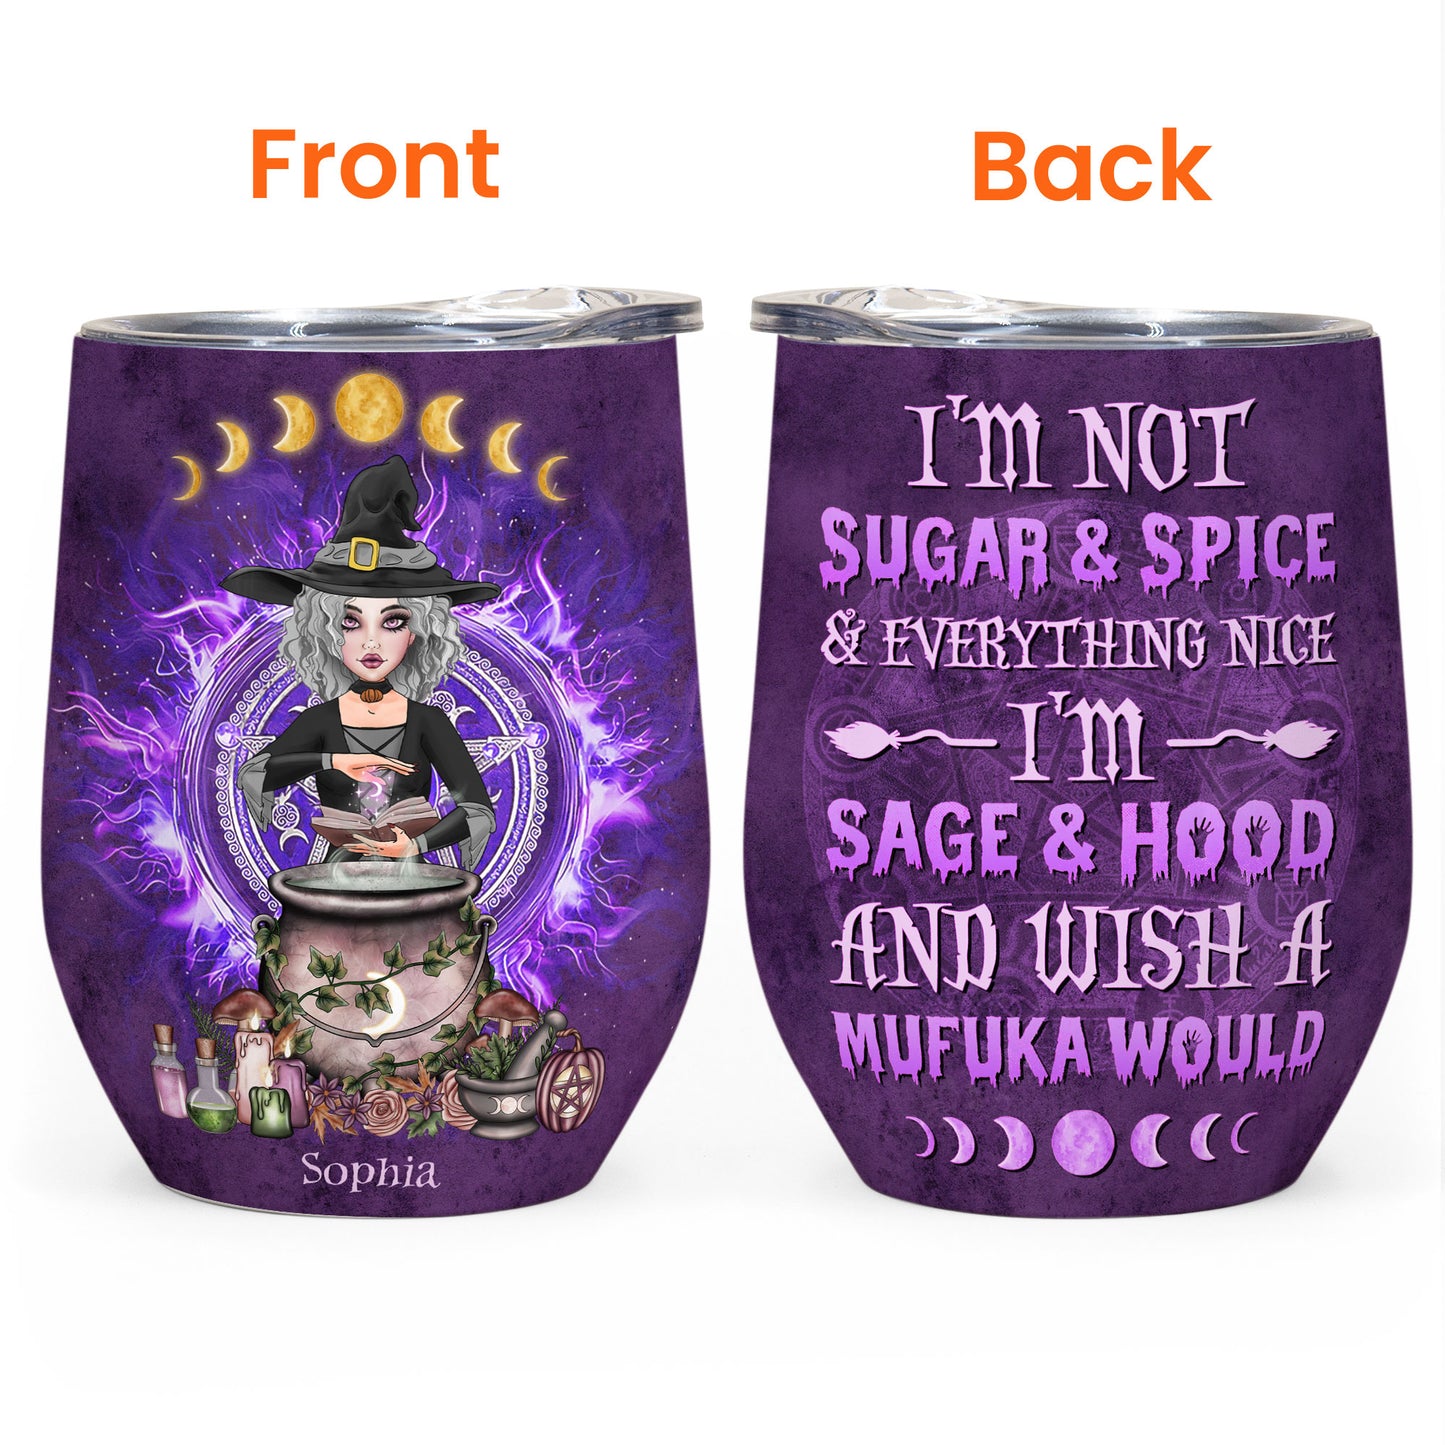 I'M Not Sugar & Spice - Wicca Version  - Personalized Wine Tumbler - Halloween, Witchcraft Gift For Witches